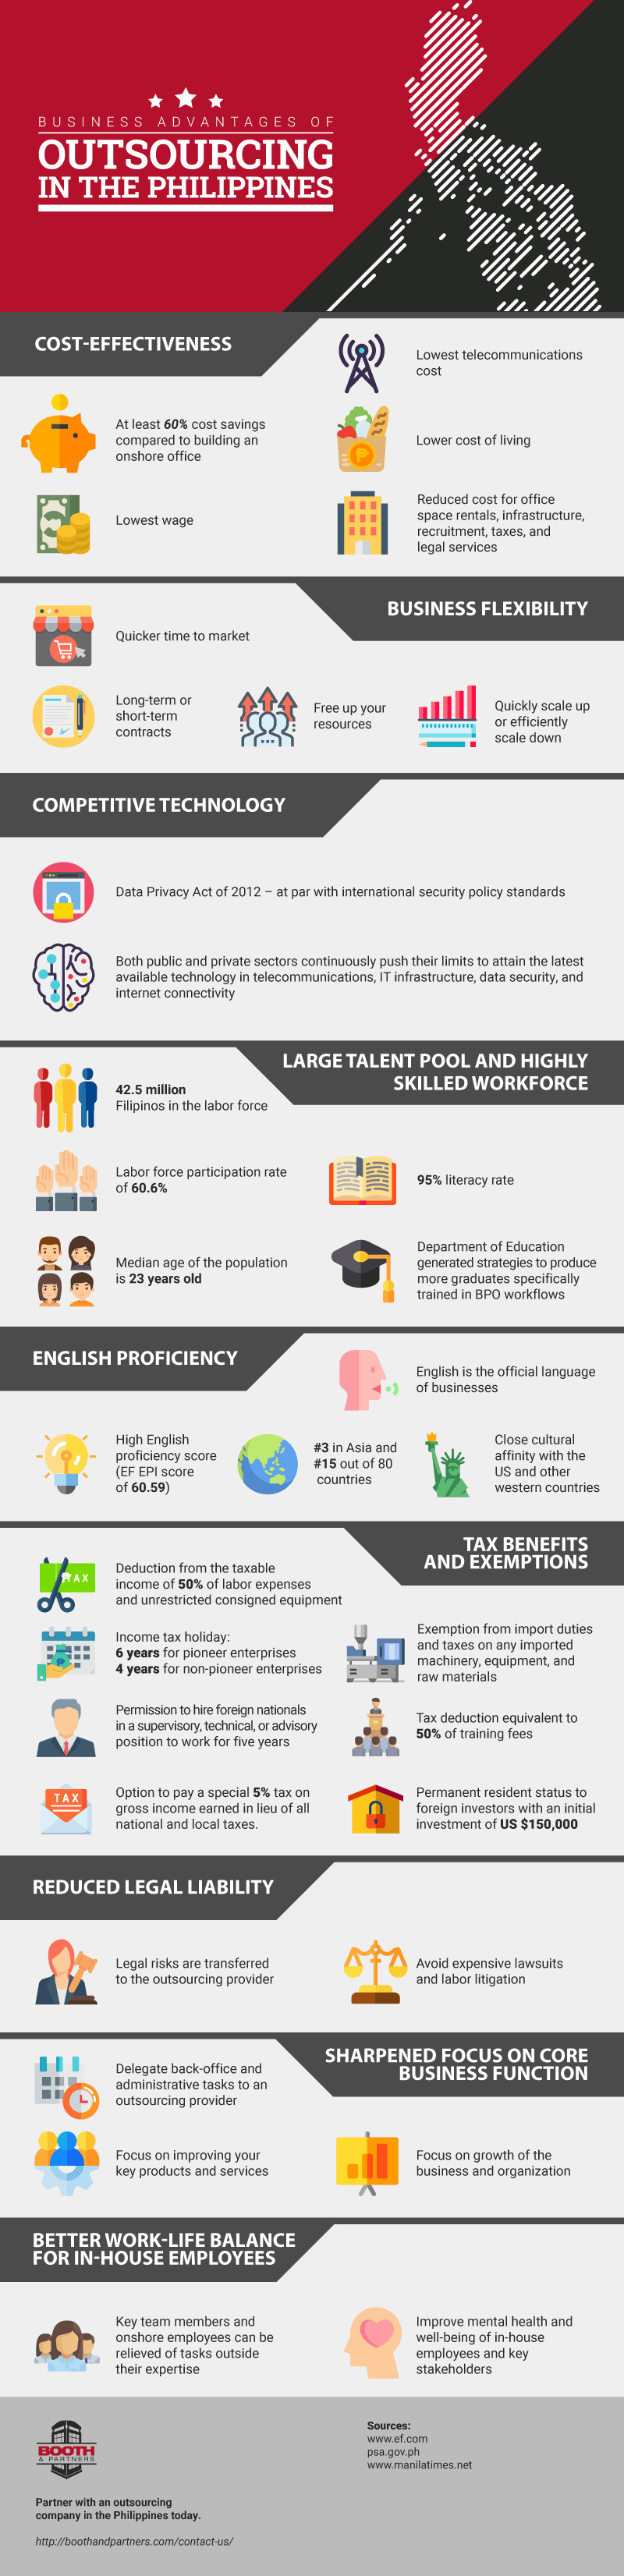 infographic about outsourcing